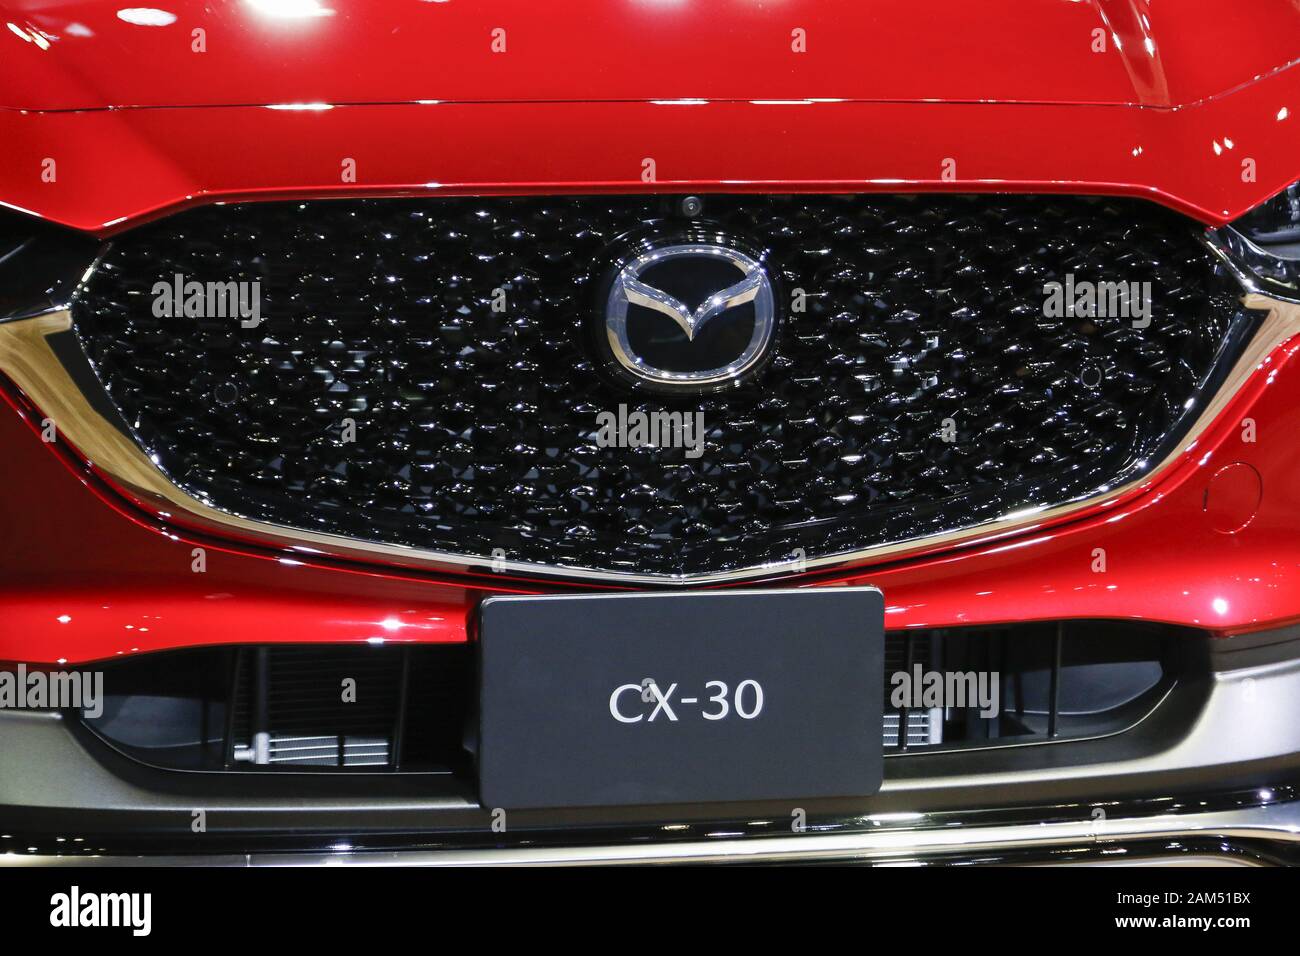 Chiba, Japan. 11th Jan, 2020. The Mazda CX-30 on display at Tokyo Auto  Salon 2020 in Makuhari Messe International Convention Complex. Tokyo Auto  Salon is an automobile exhibition showcasing their latest technological